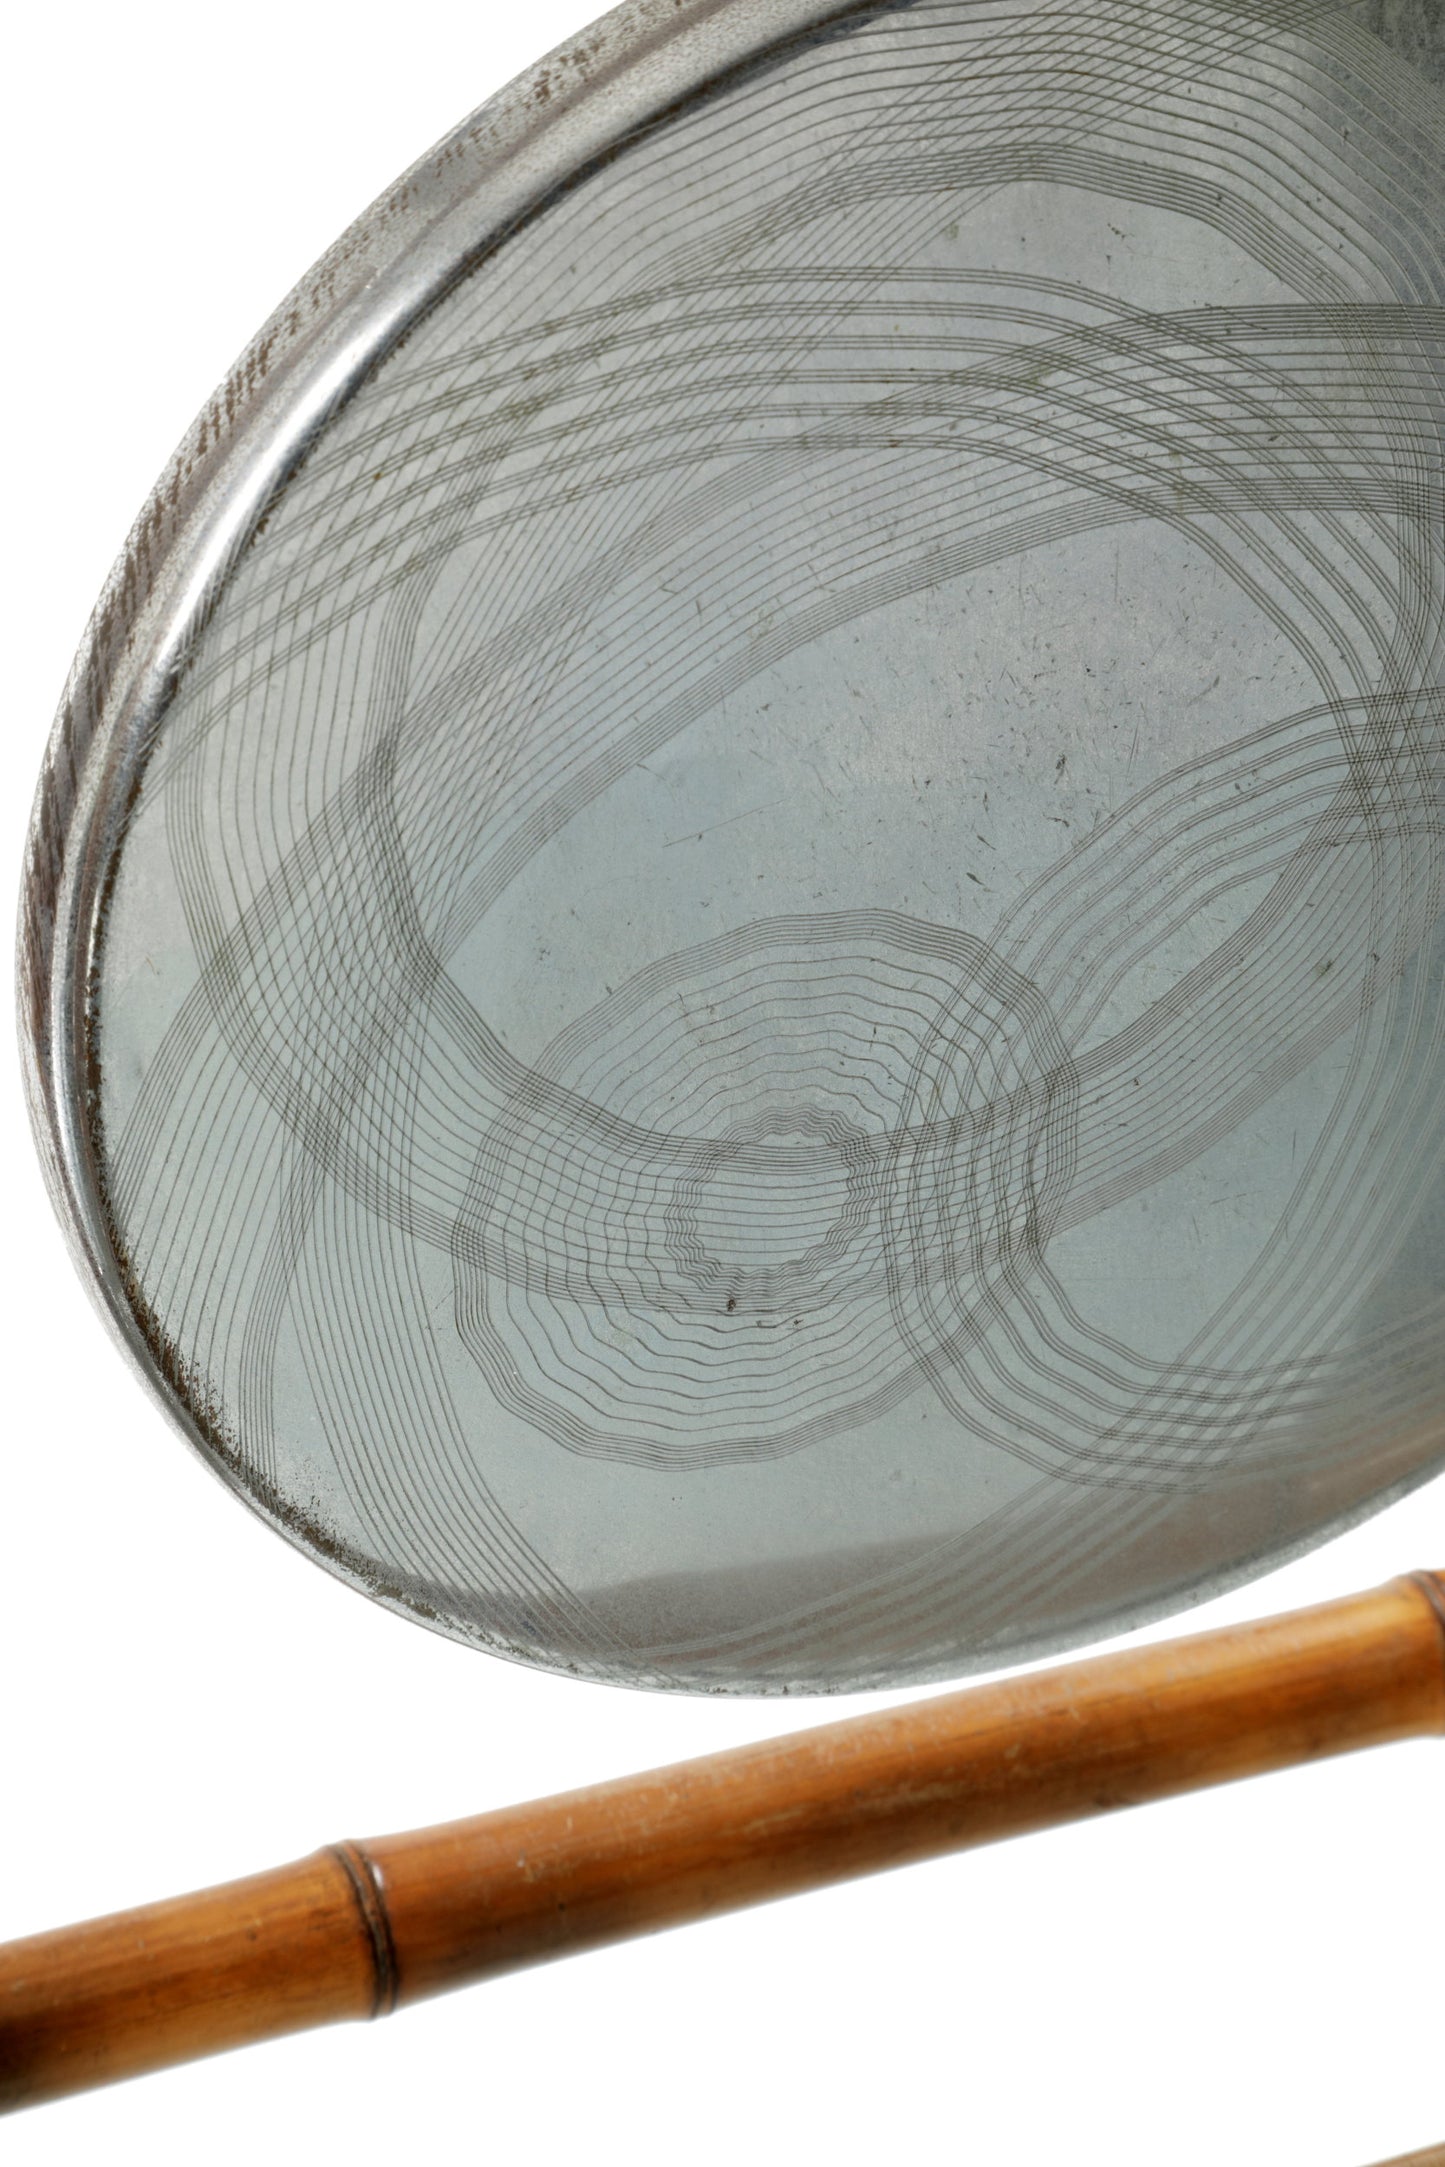 Oriental gong from the 1930s